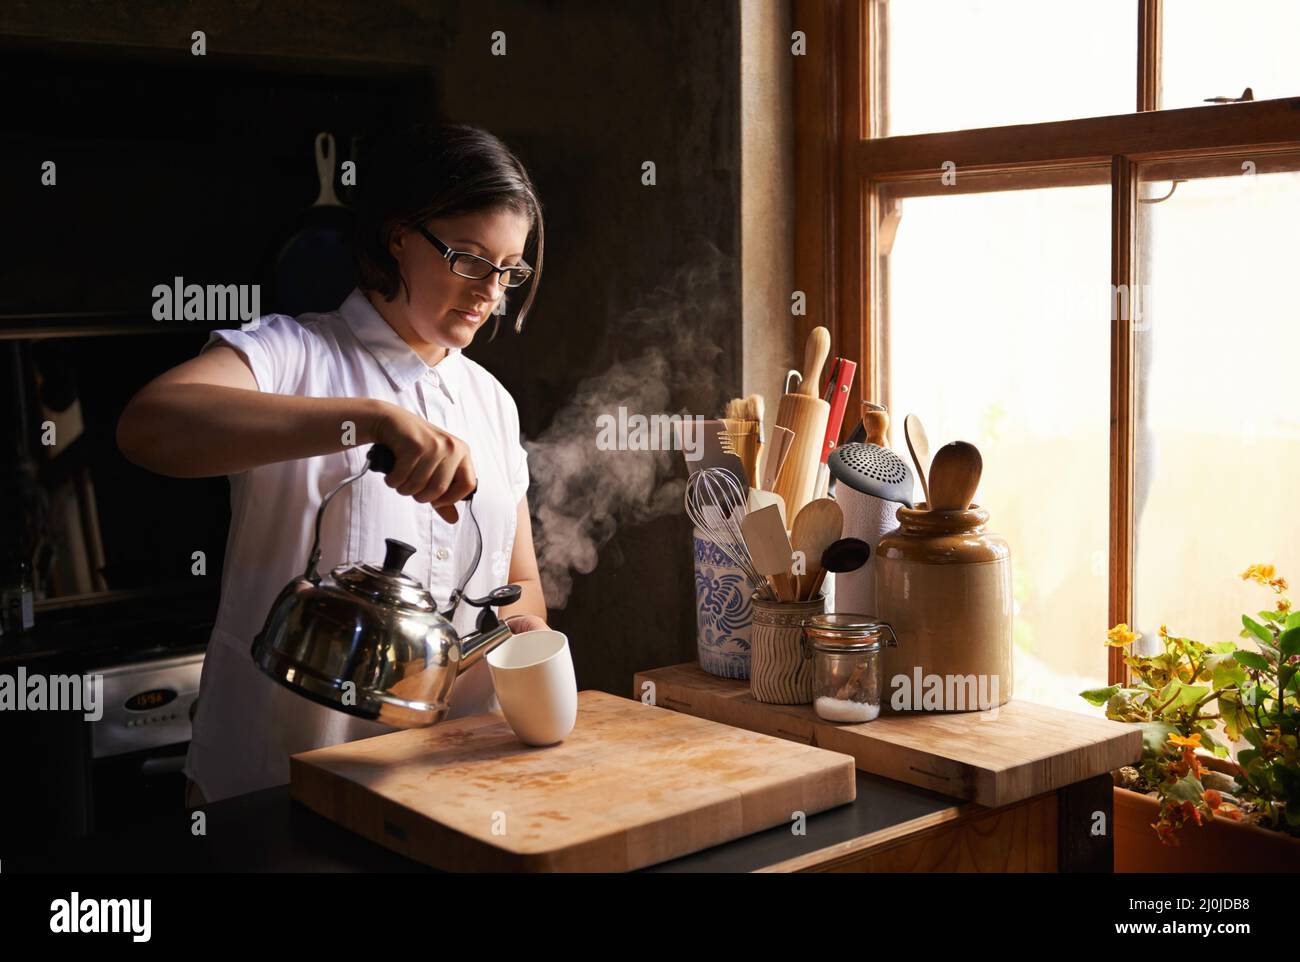 The best thing after a long day. Shot of an attractive young woman making a cup of tea in her kitchen. Stock Photo